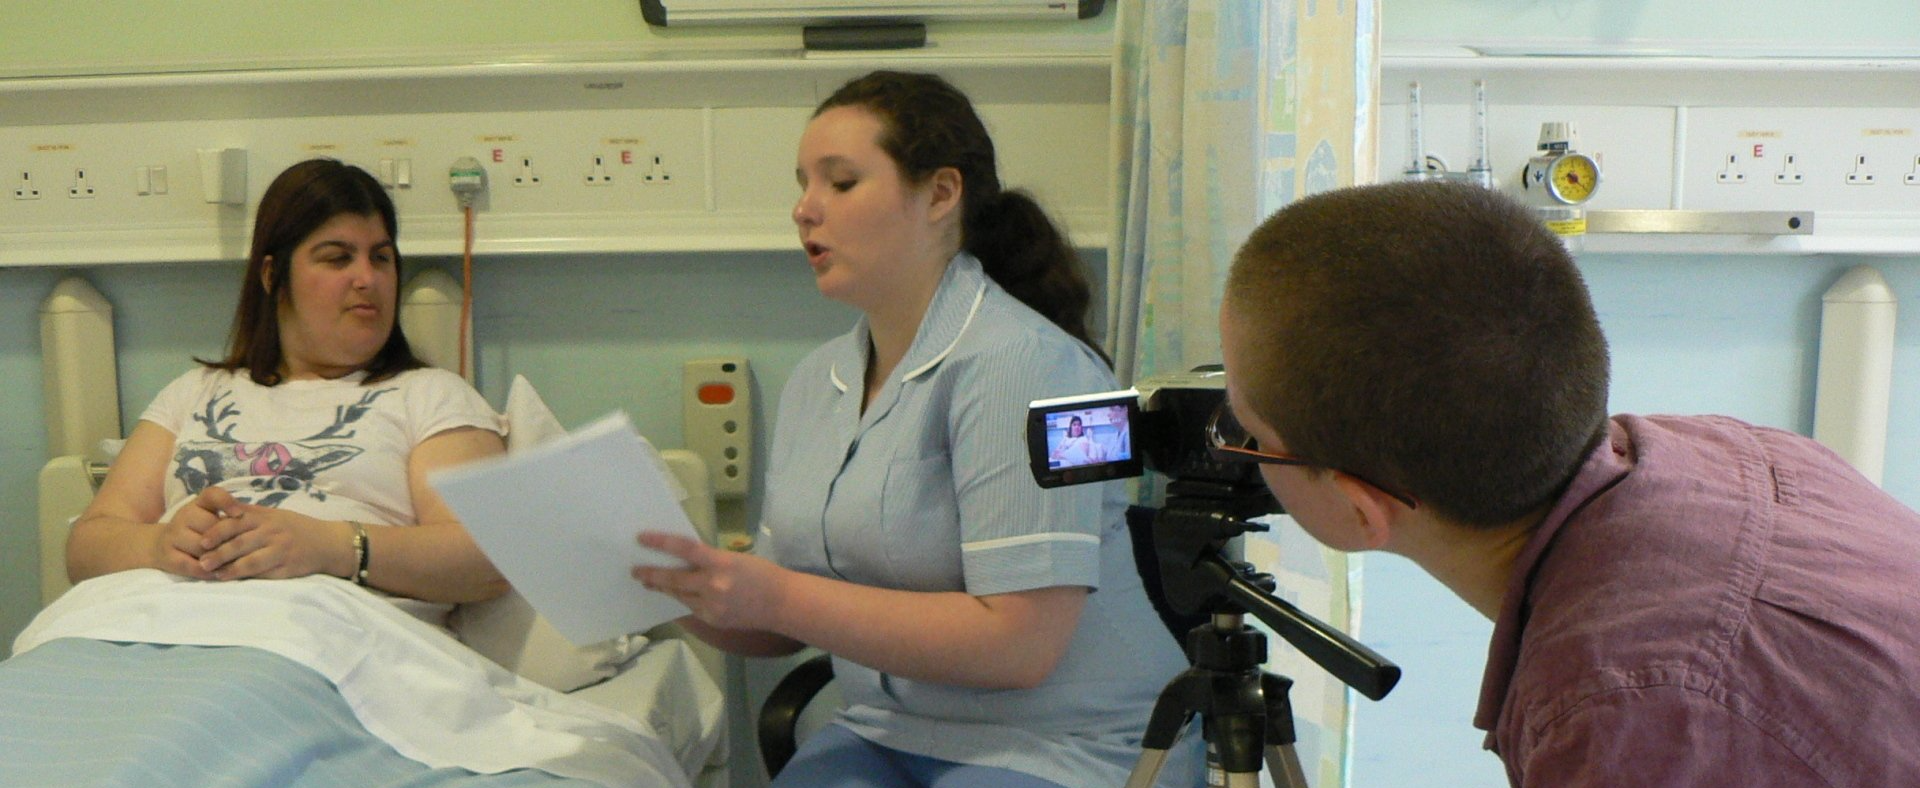 A woman in a hospital bed with a nurse sitting next to the bed, reading from a document. In the foreground is a person behind a camera, filming the scene